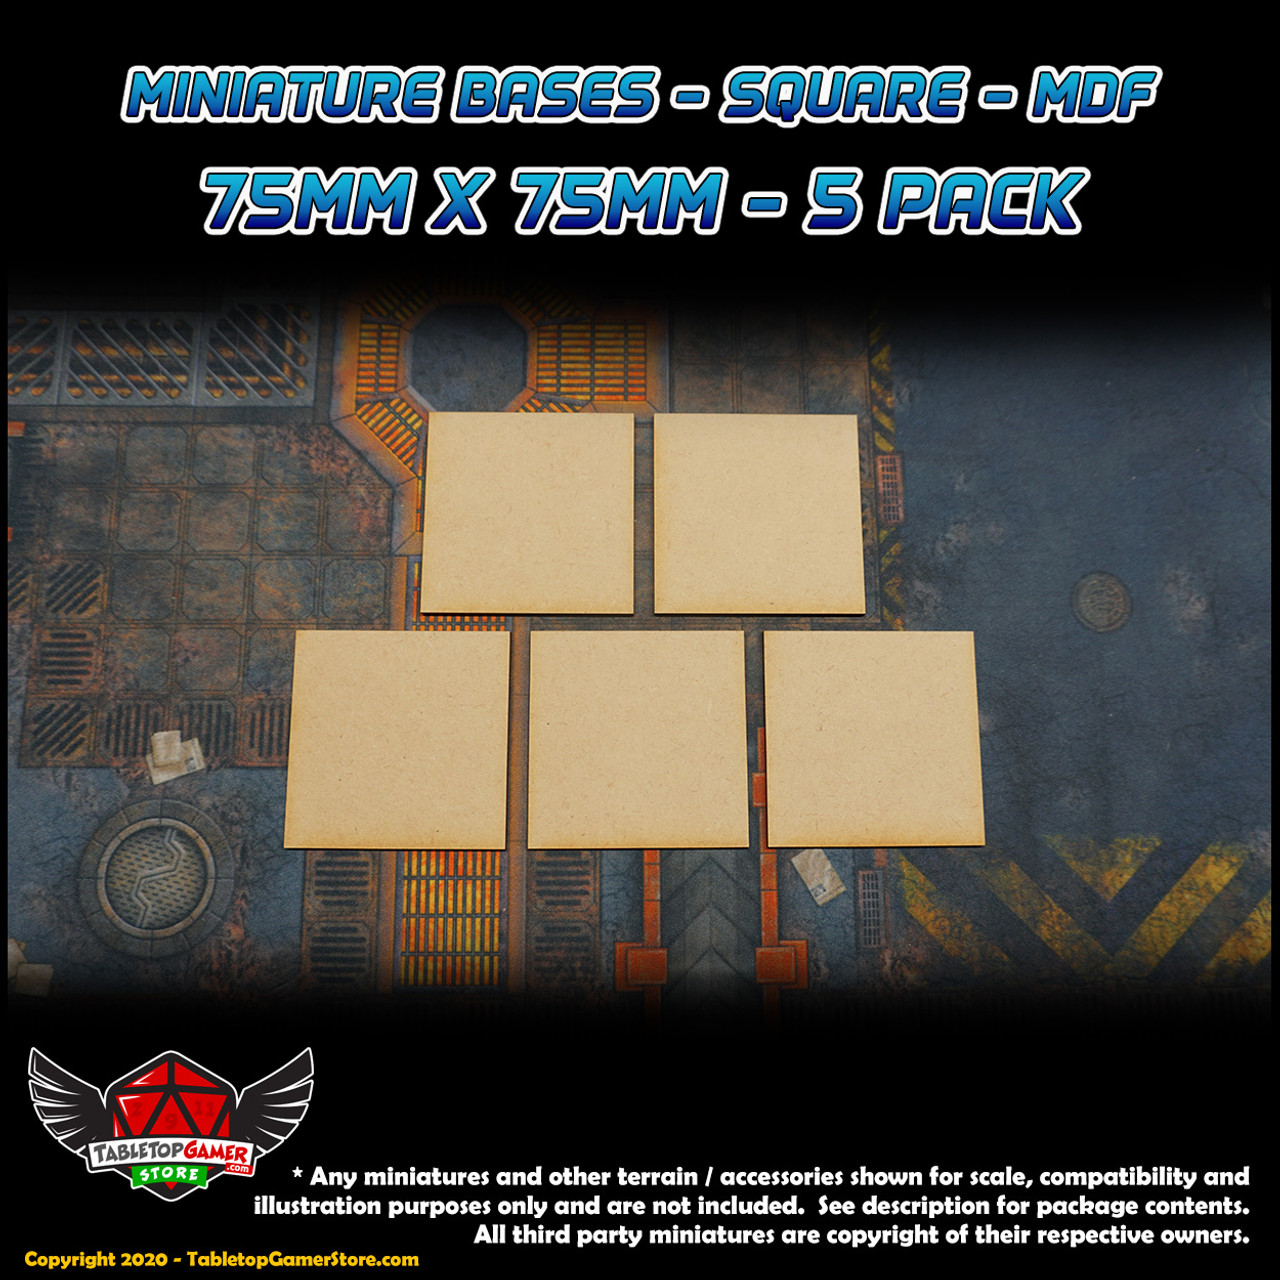 Miniature Bases - Square - MDF - 75mm x75mm - 5 Pack